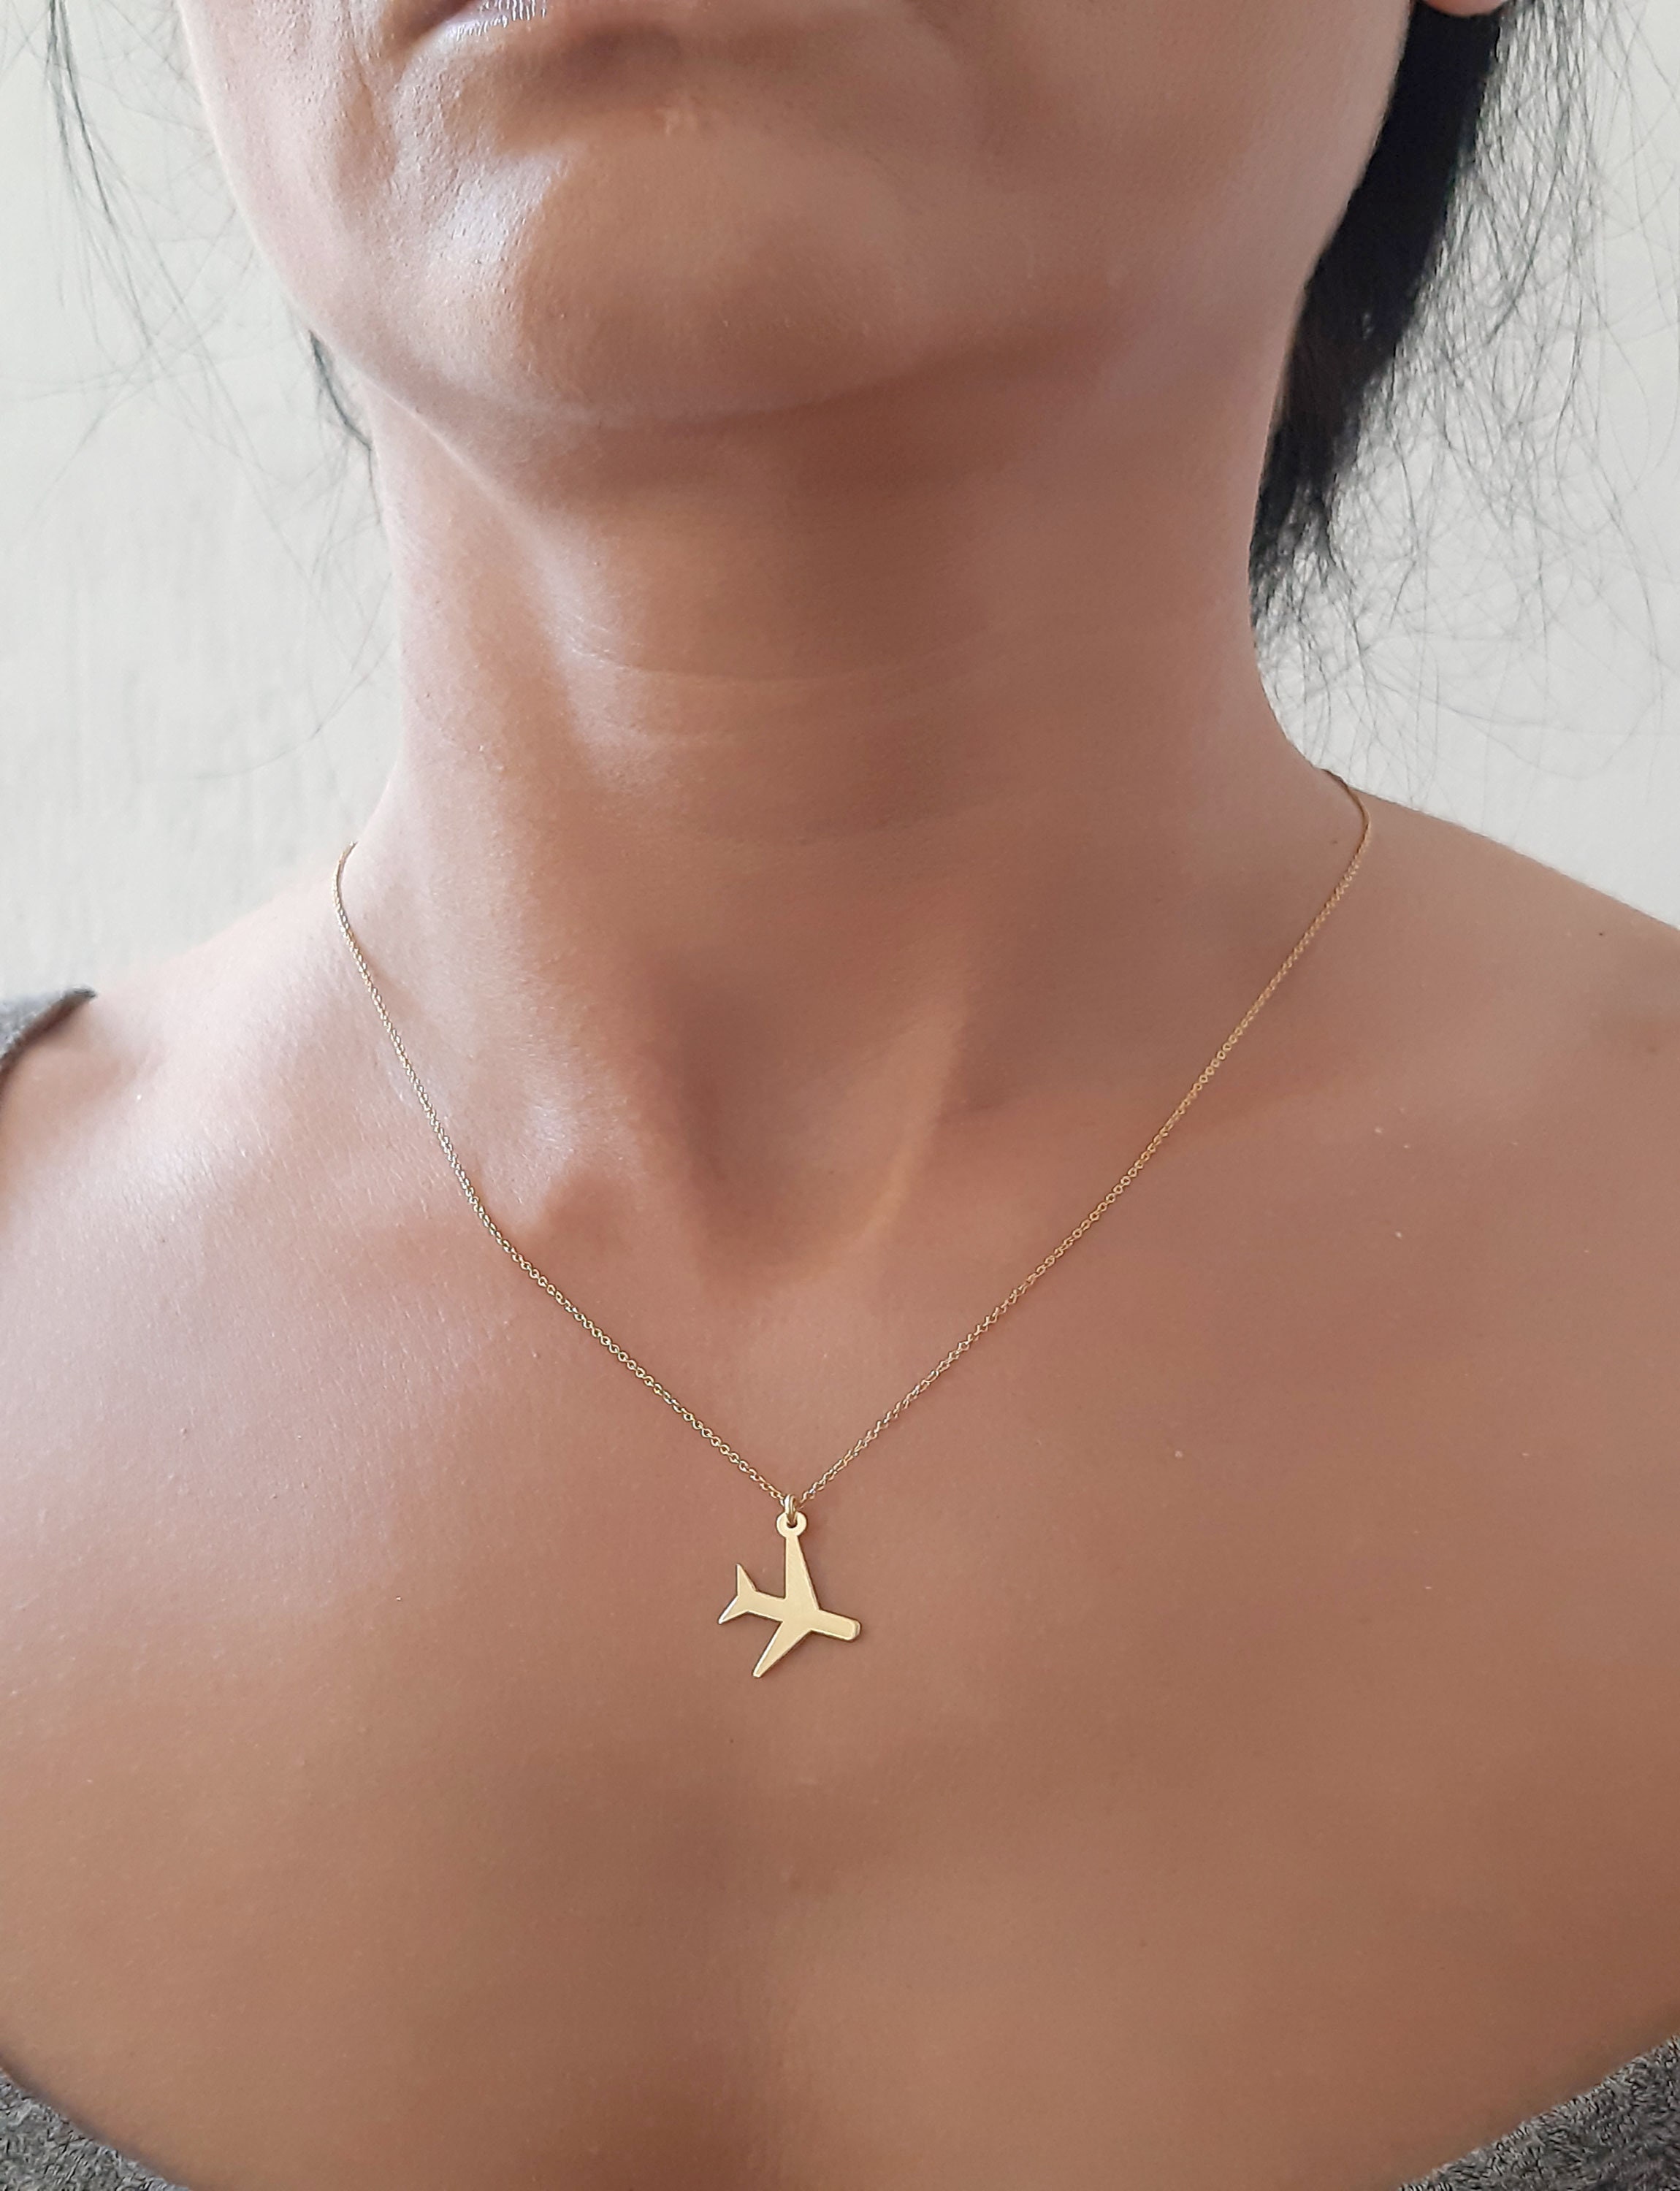 Pendant Necklaces Necklace For Women Plane Necklace Airplane Pendant  Necklace Aircraft Chain Layered Tiny Dainty Jewelry R230828 From 10,07 € |  DHgate